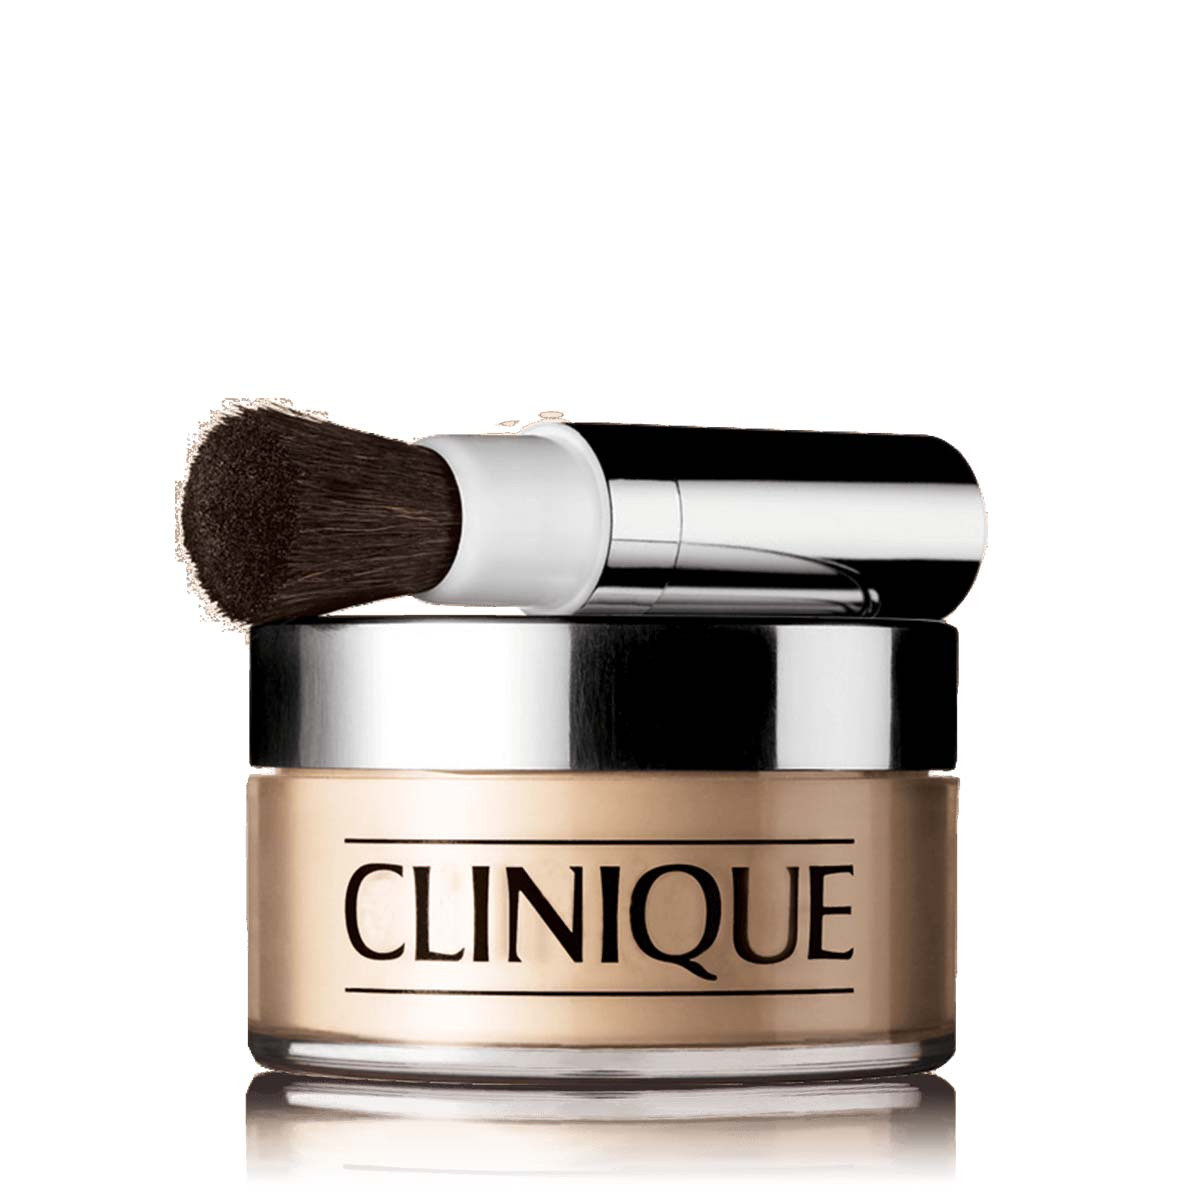 Clinique blended face powder invisible blend 20, 20 CLINIQUE, large image number 0